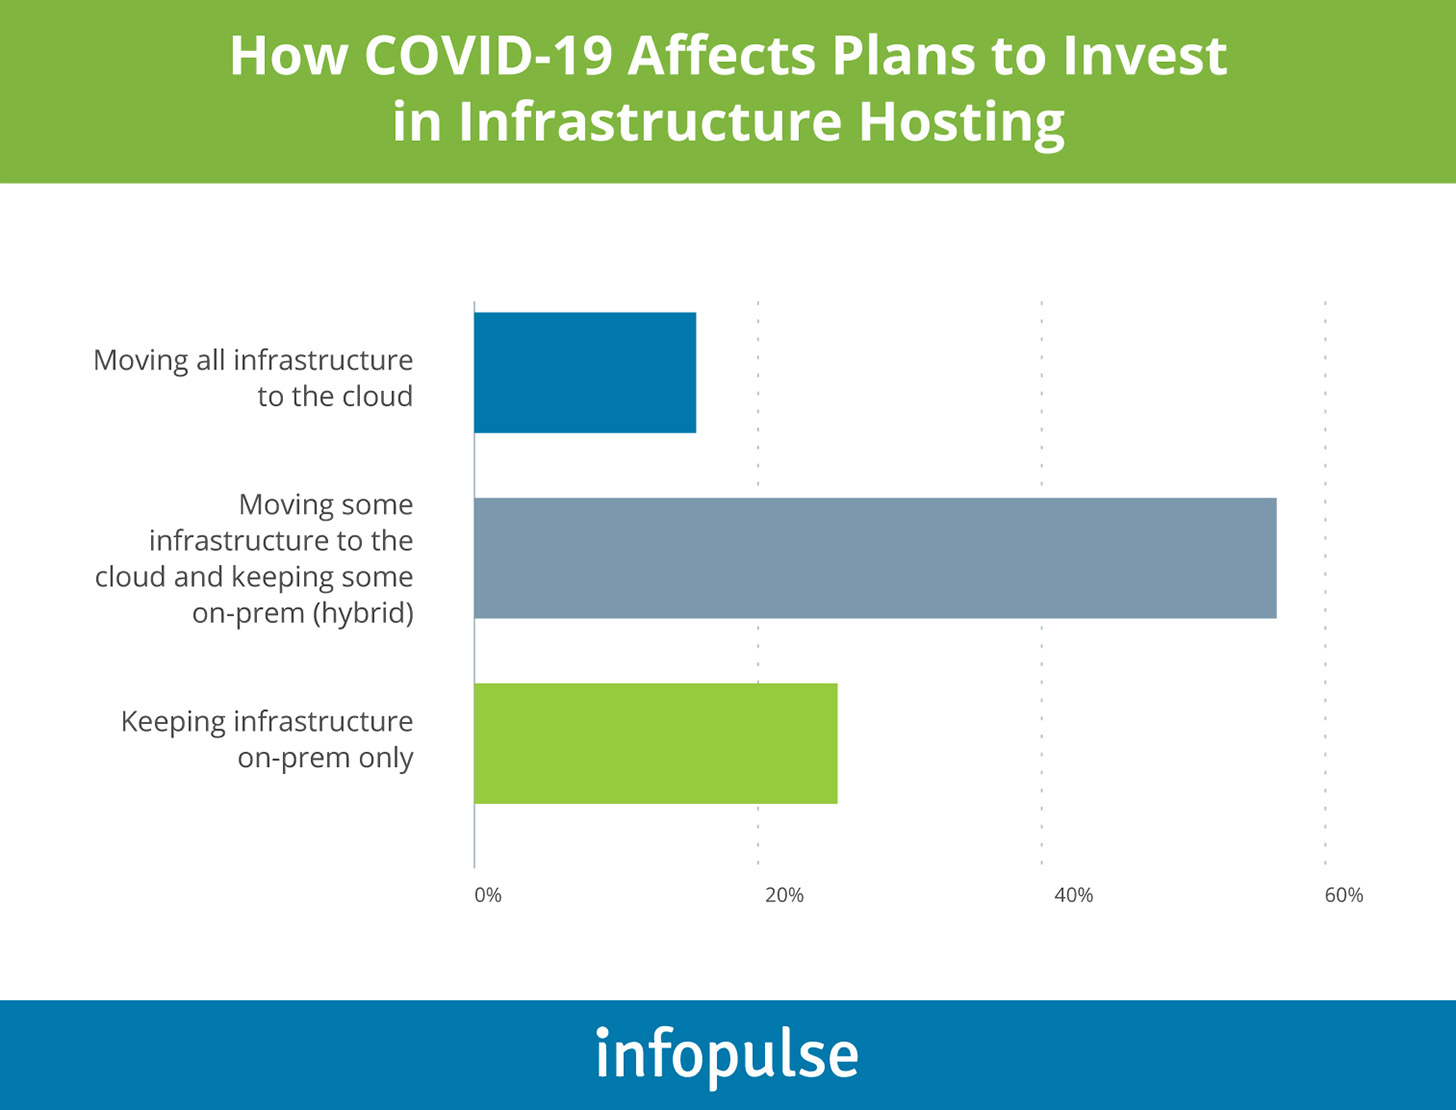 How COVID-19 affects plans to invest in infrastructure hosting - Infopulse